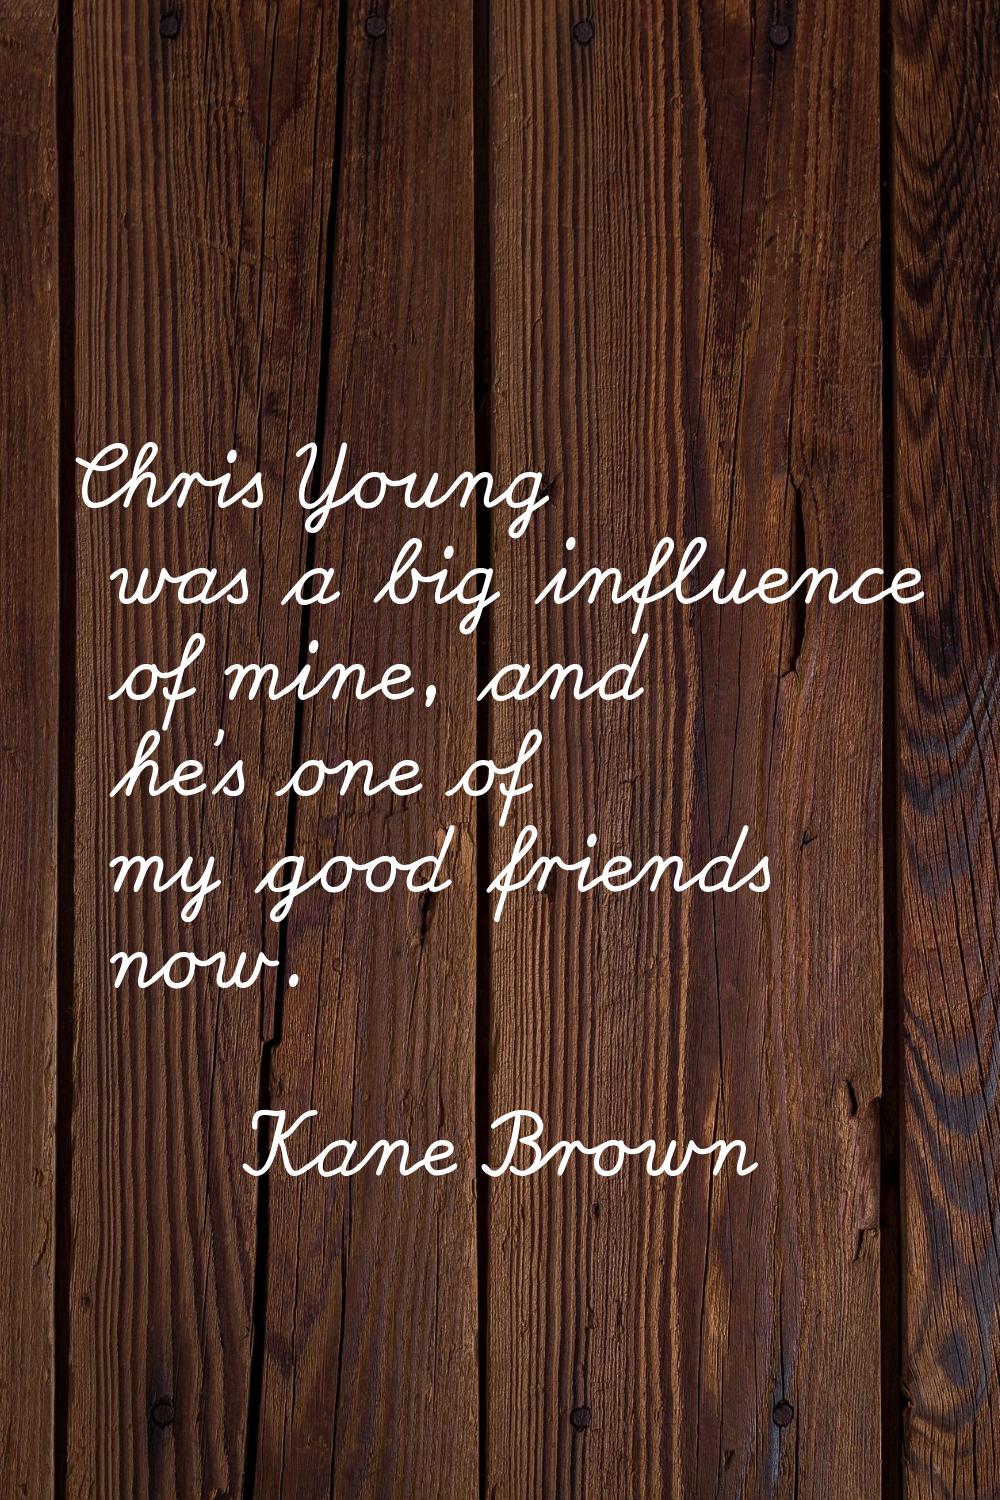 Chris Young was a big influence of mine, and he's one of my good friends now.